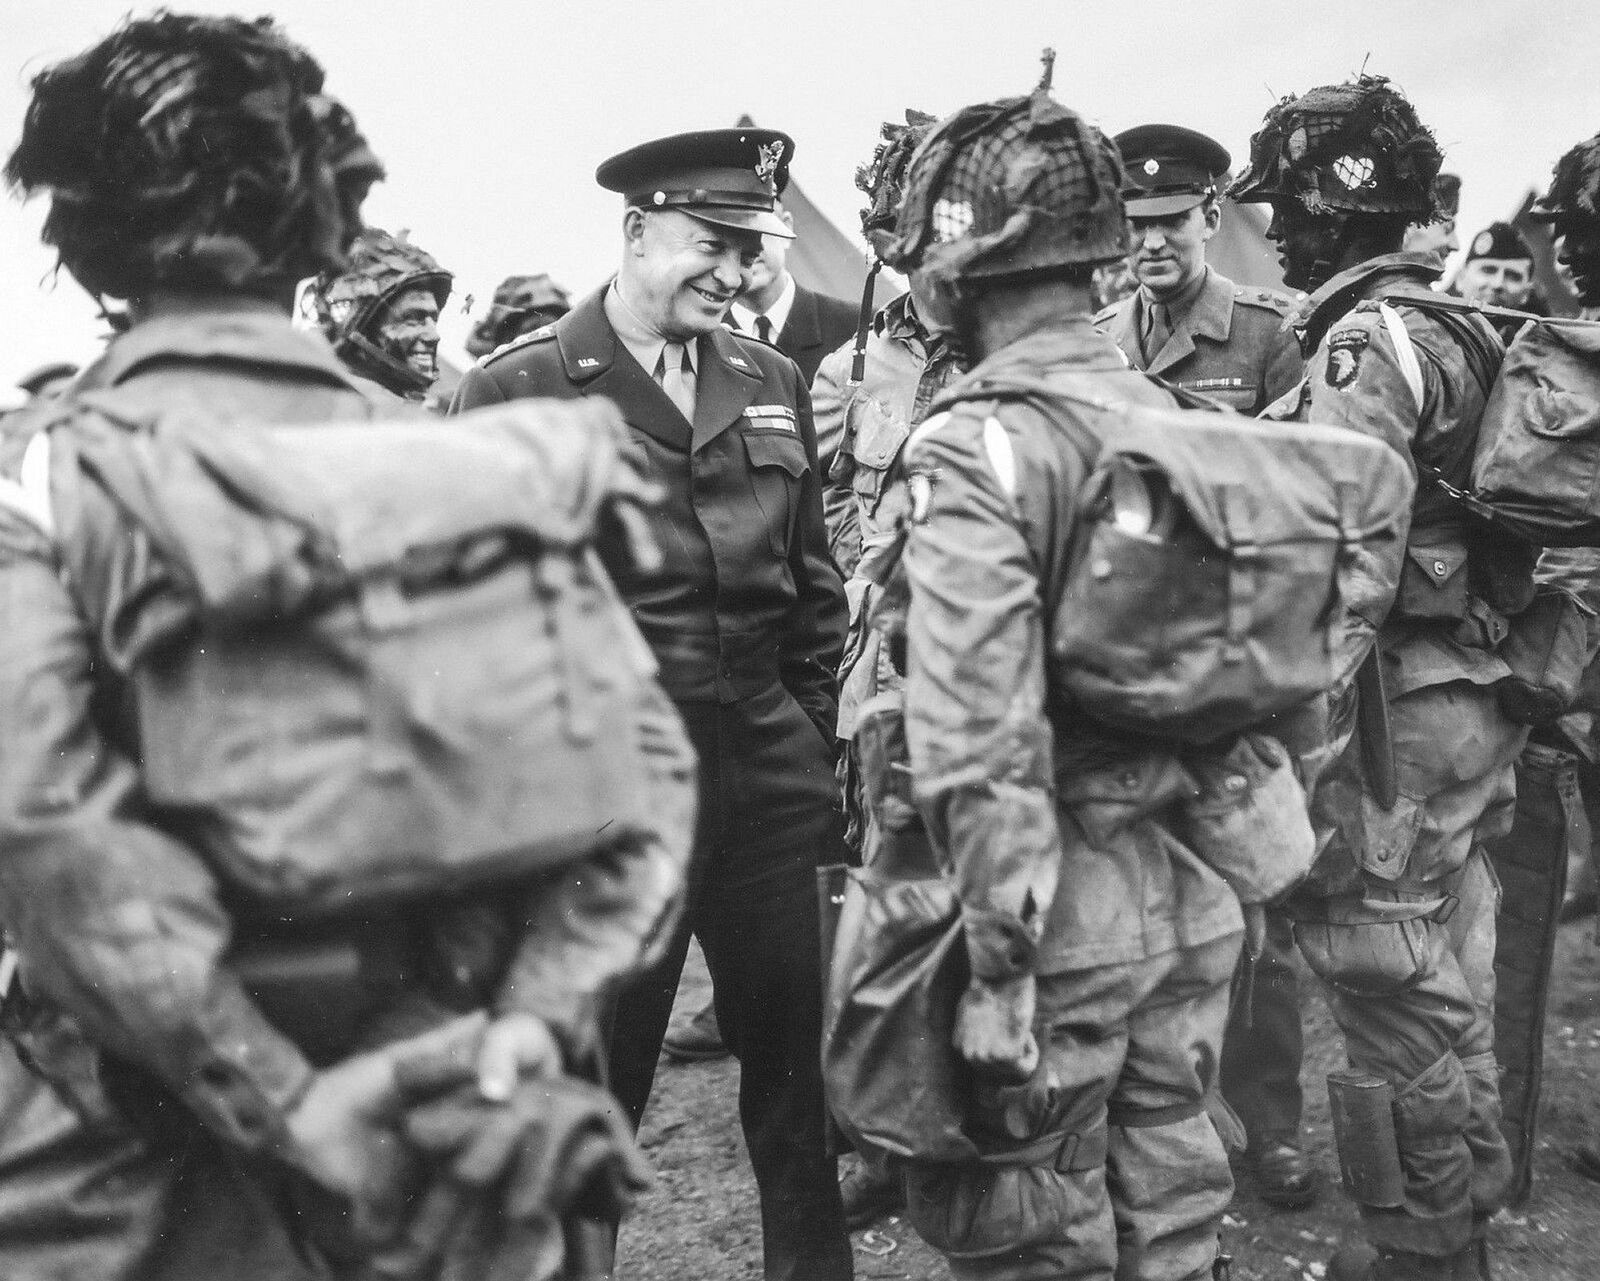 WW2 GENERAL EISENHOWER Meets with PARATROOPERS Prior to D Day Invasion PHOTO